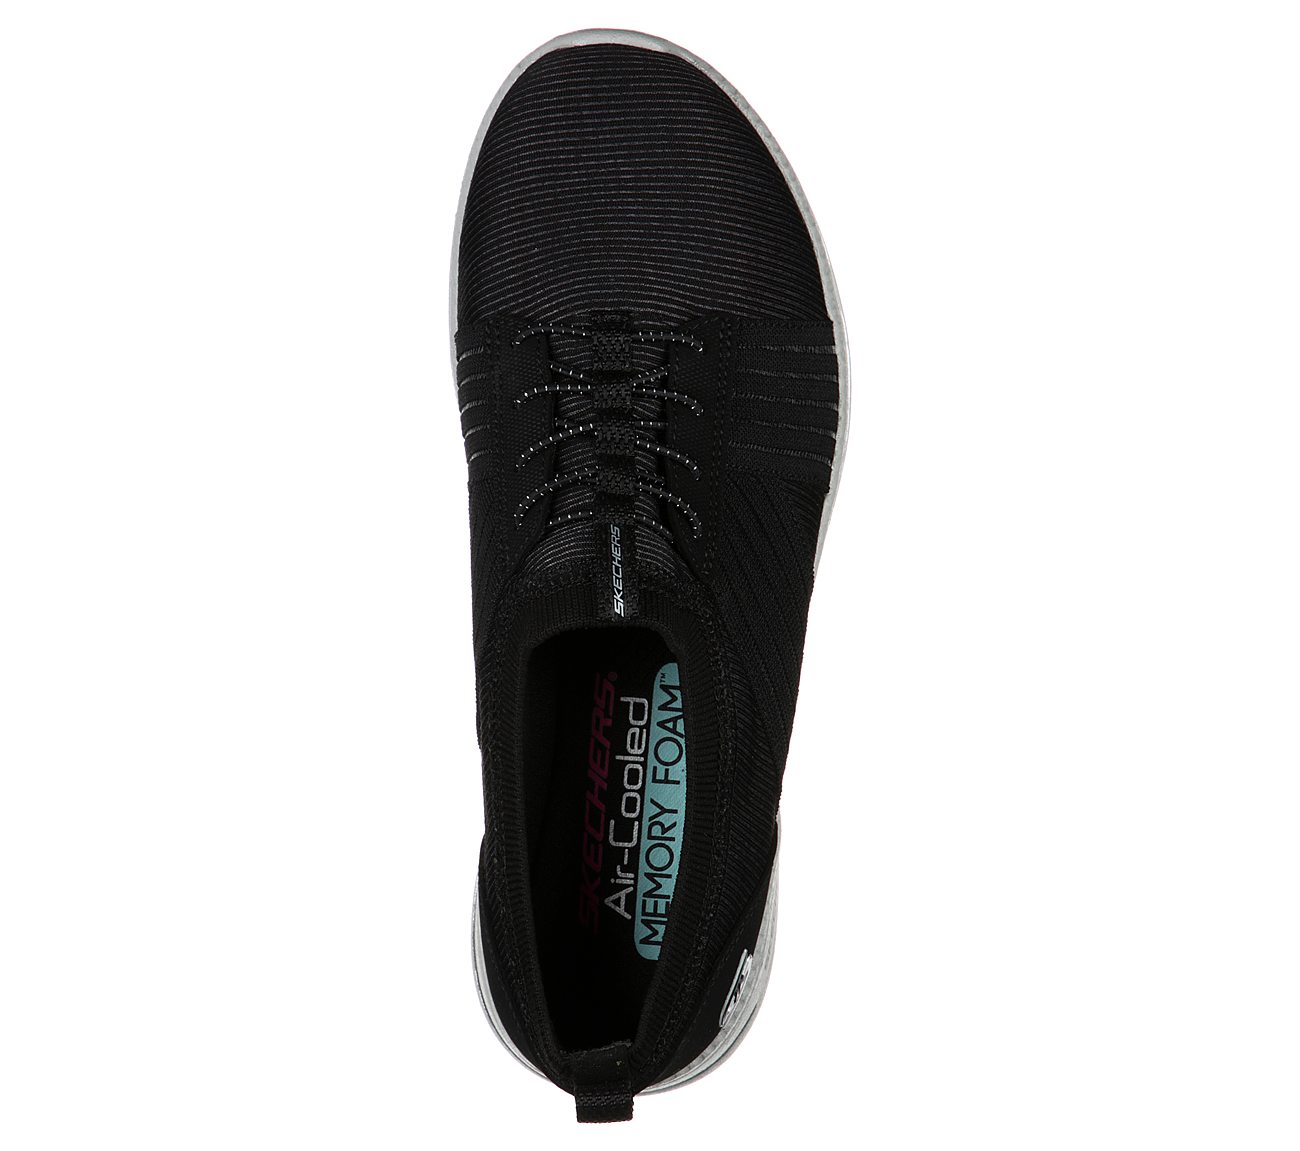 CITY PRO - EASY MOVING, BBBBLACK Footwear Top View